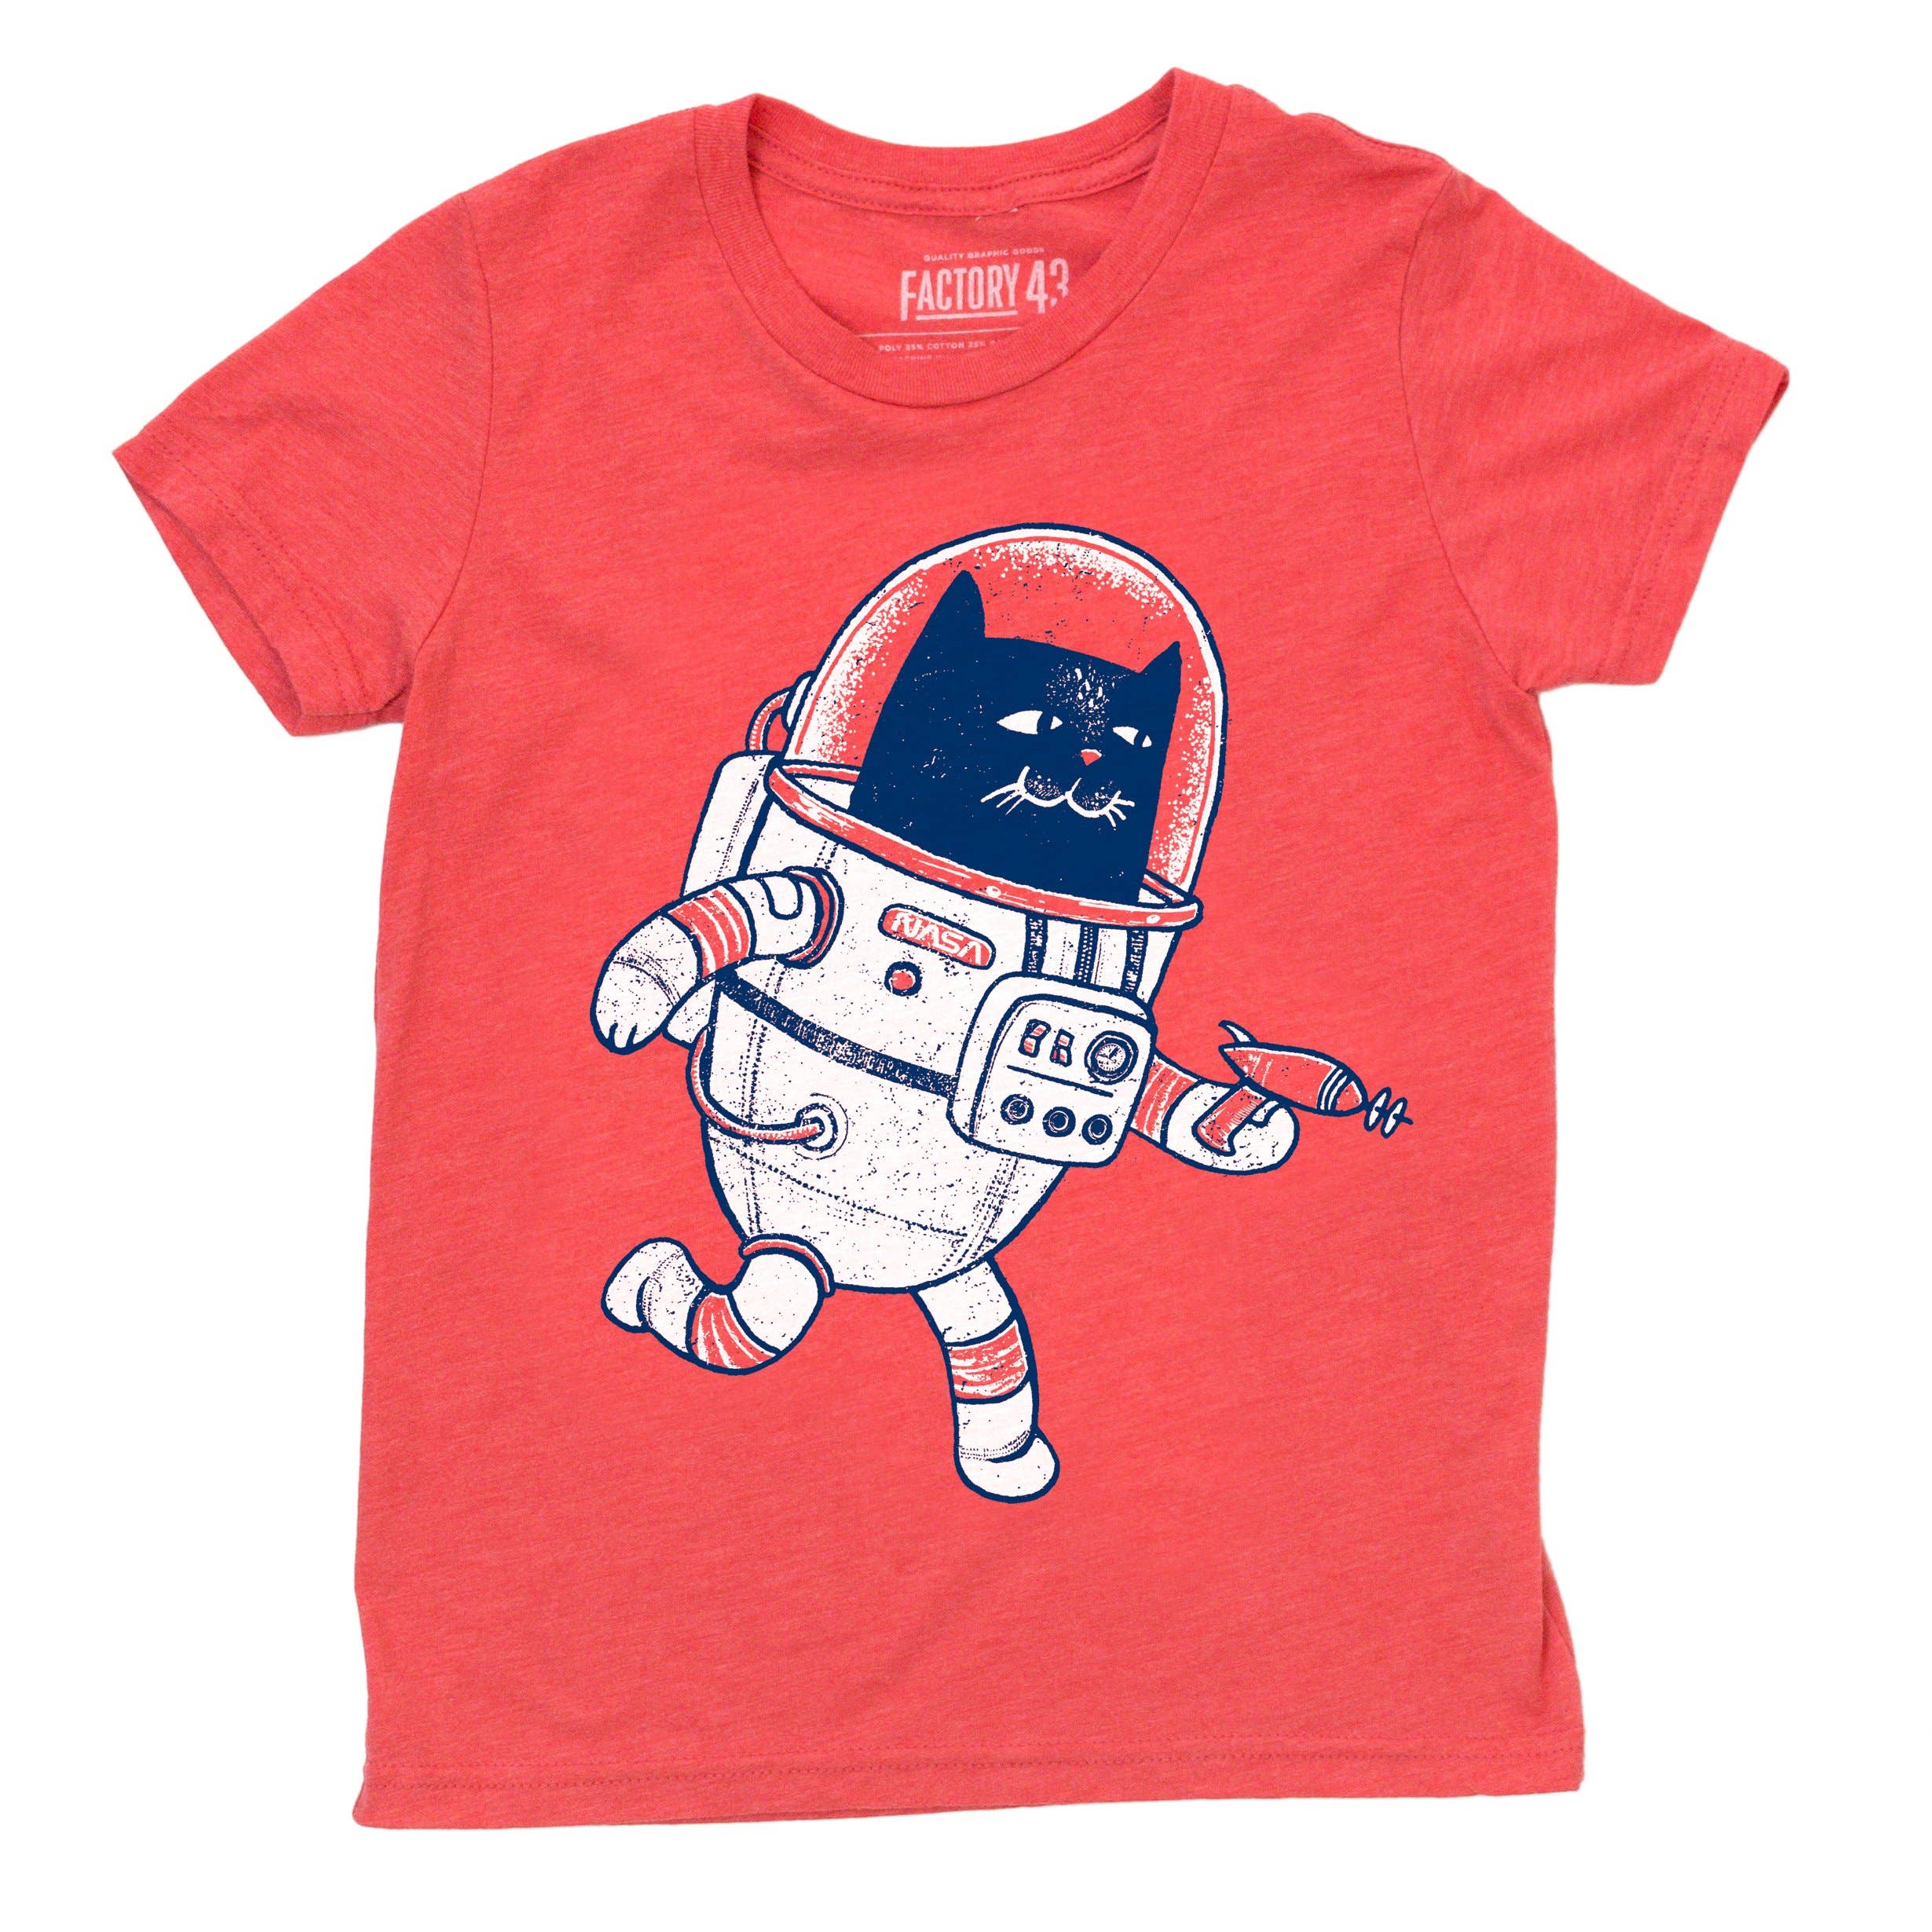 Factory 43 - Space Cat Youth Shirt: YOUTH M (10-12)